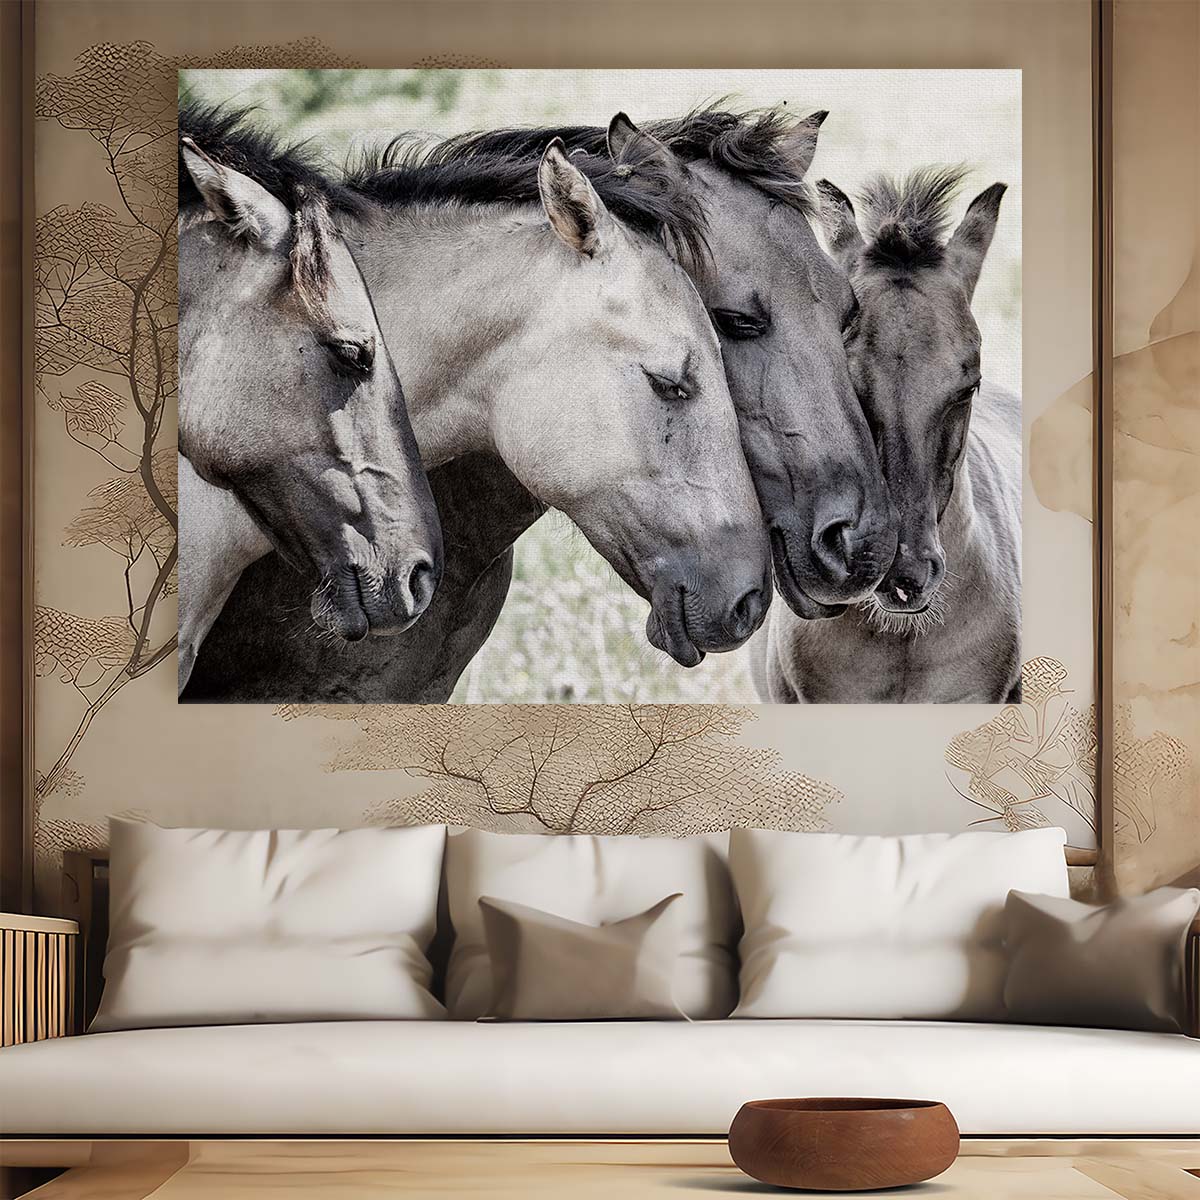 Romantic Konik Horses Countryside Encounter Wall Art by Luxuriance Designs. Made in USA.